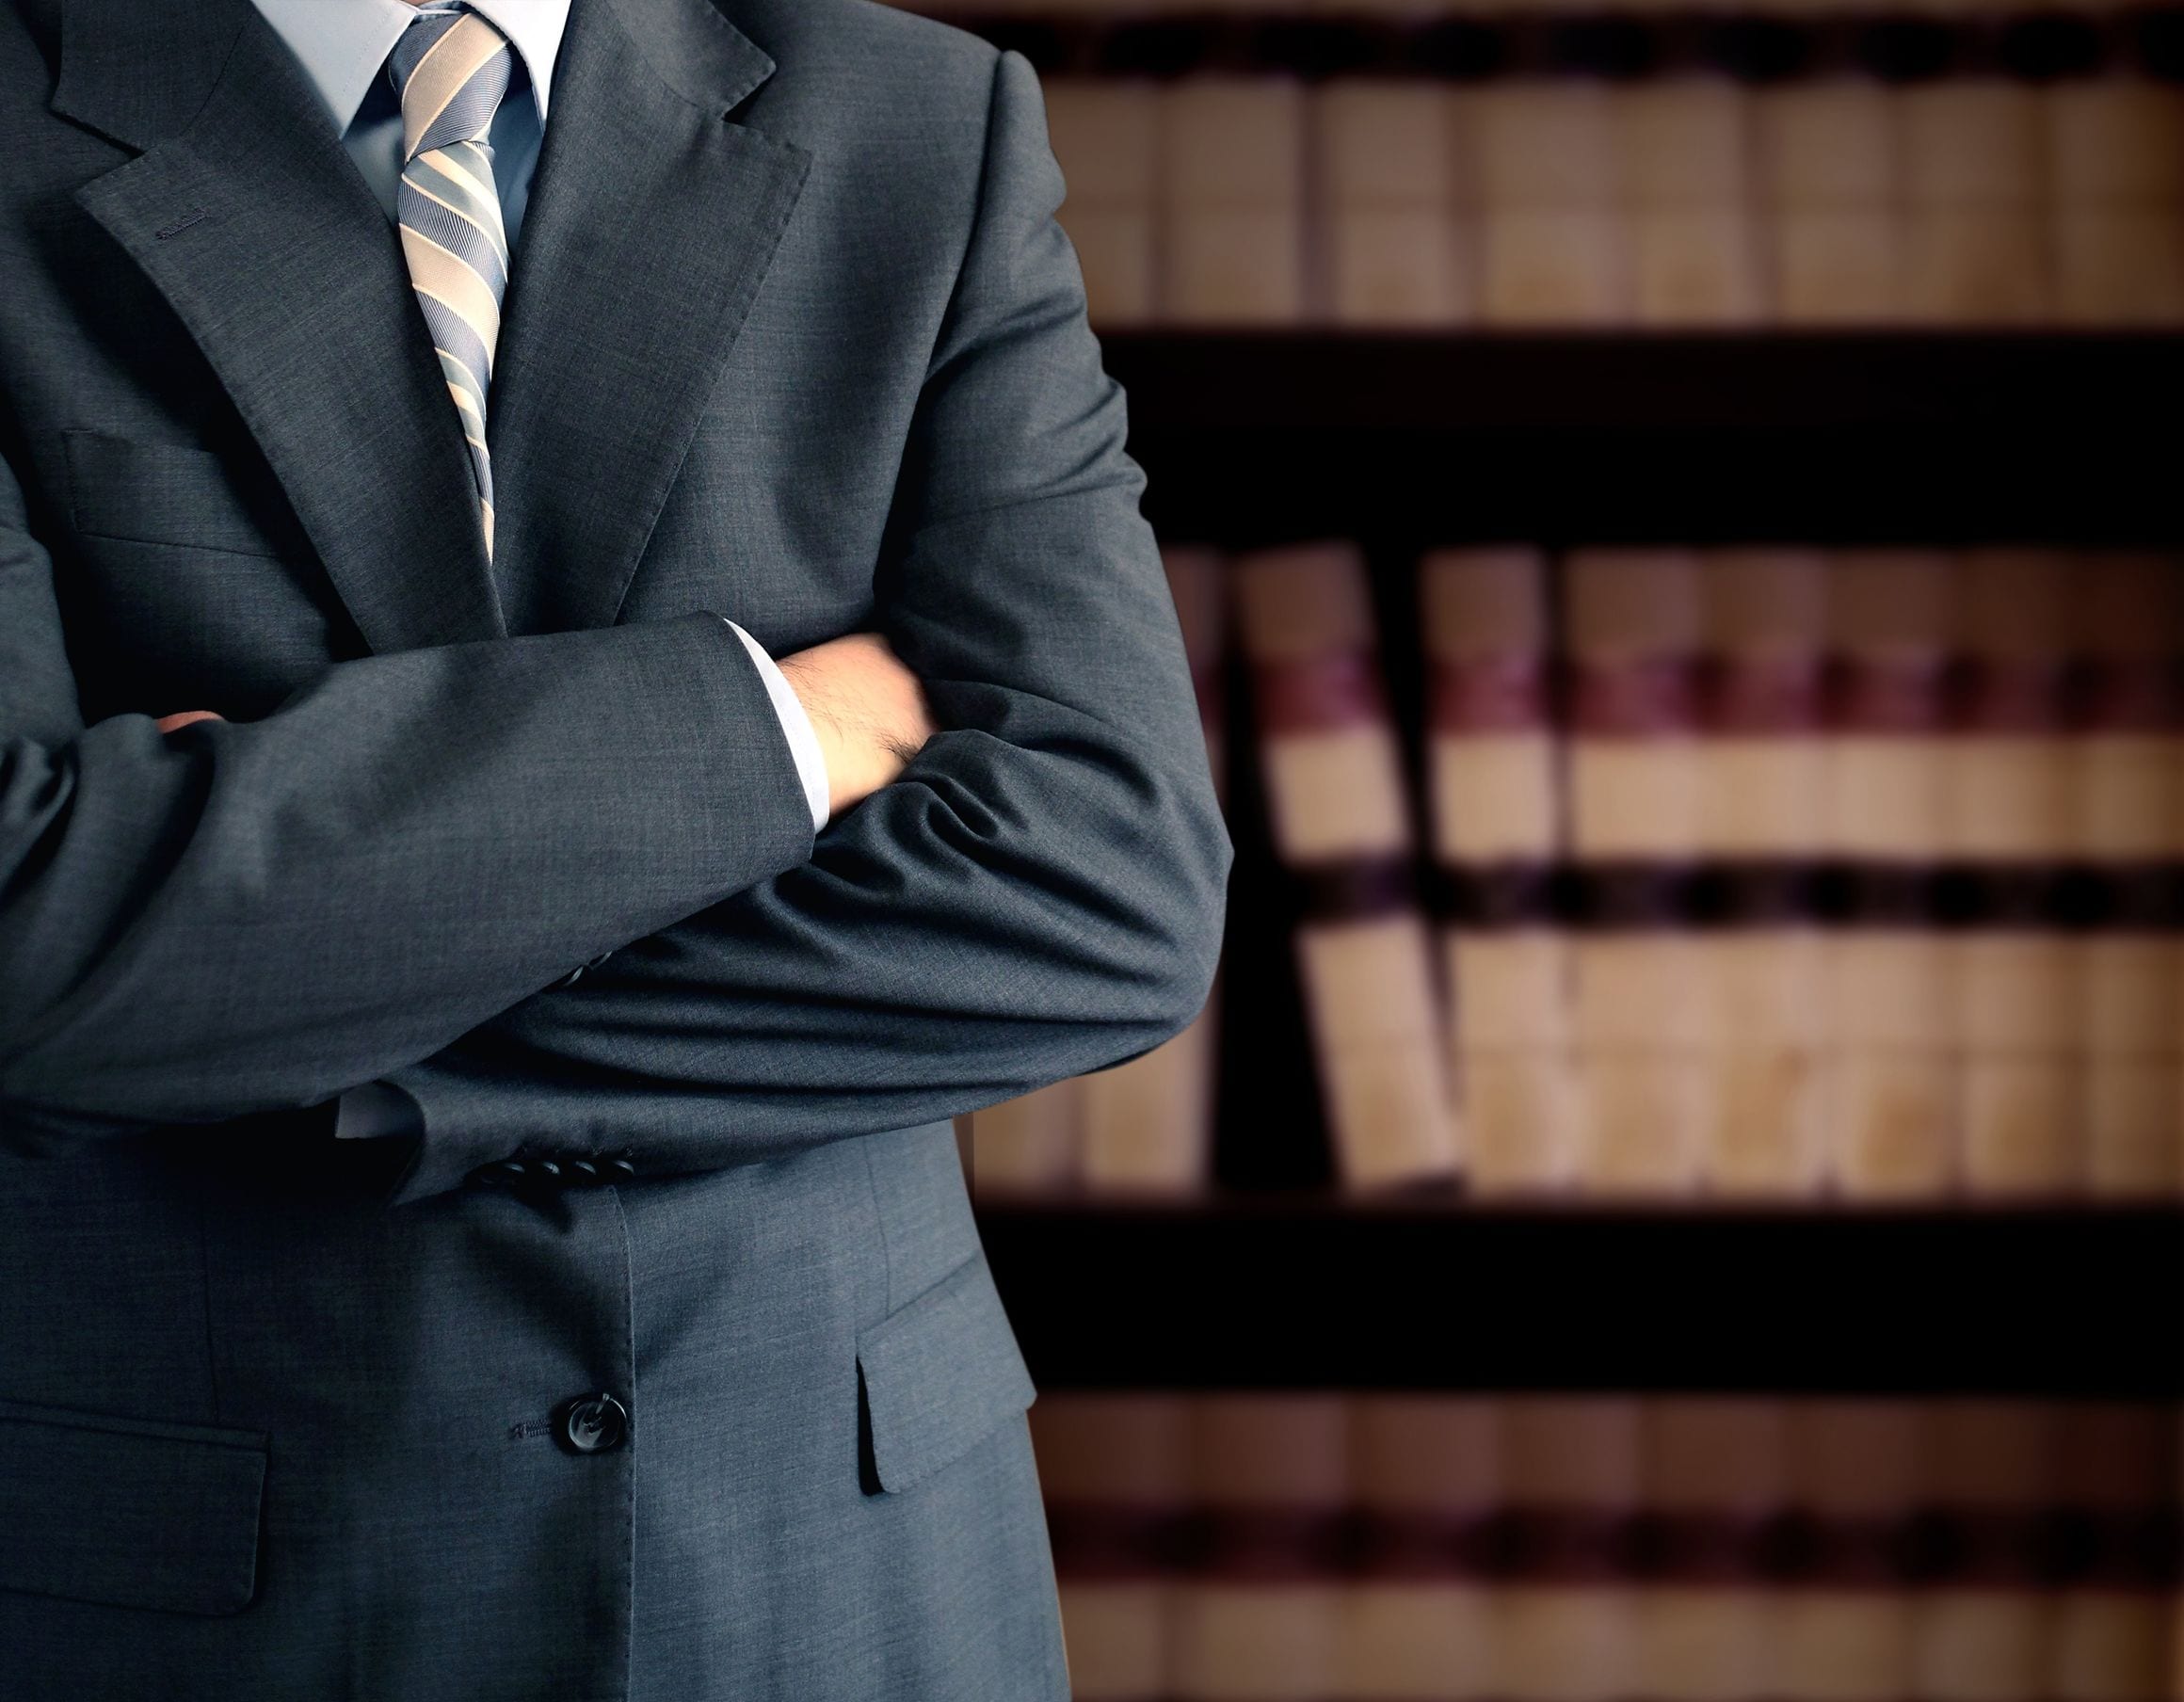 What to Look for in a Federal Defense Lawyer